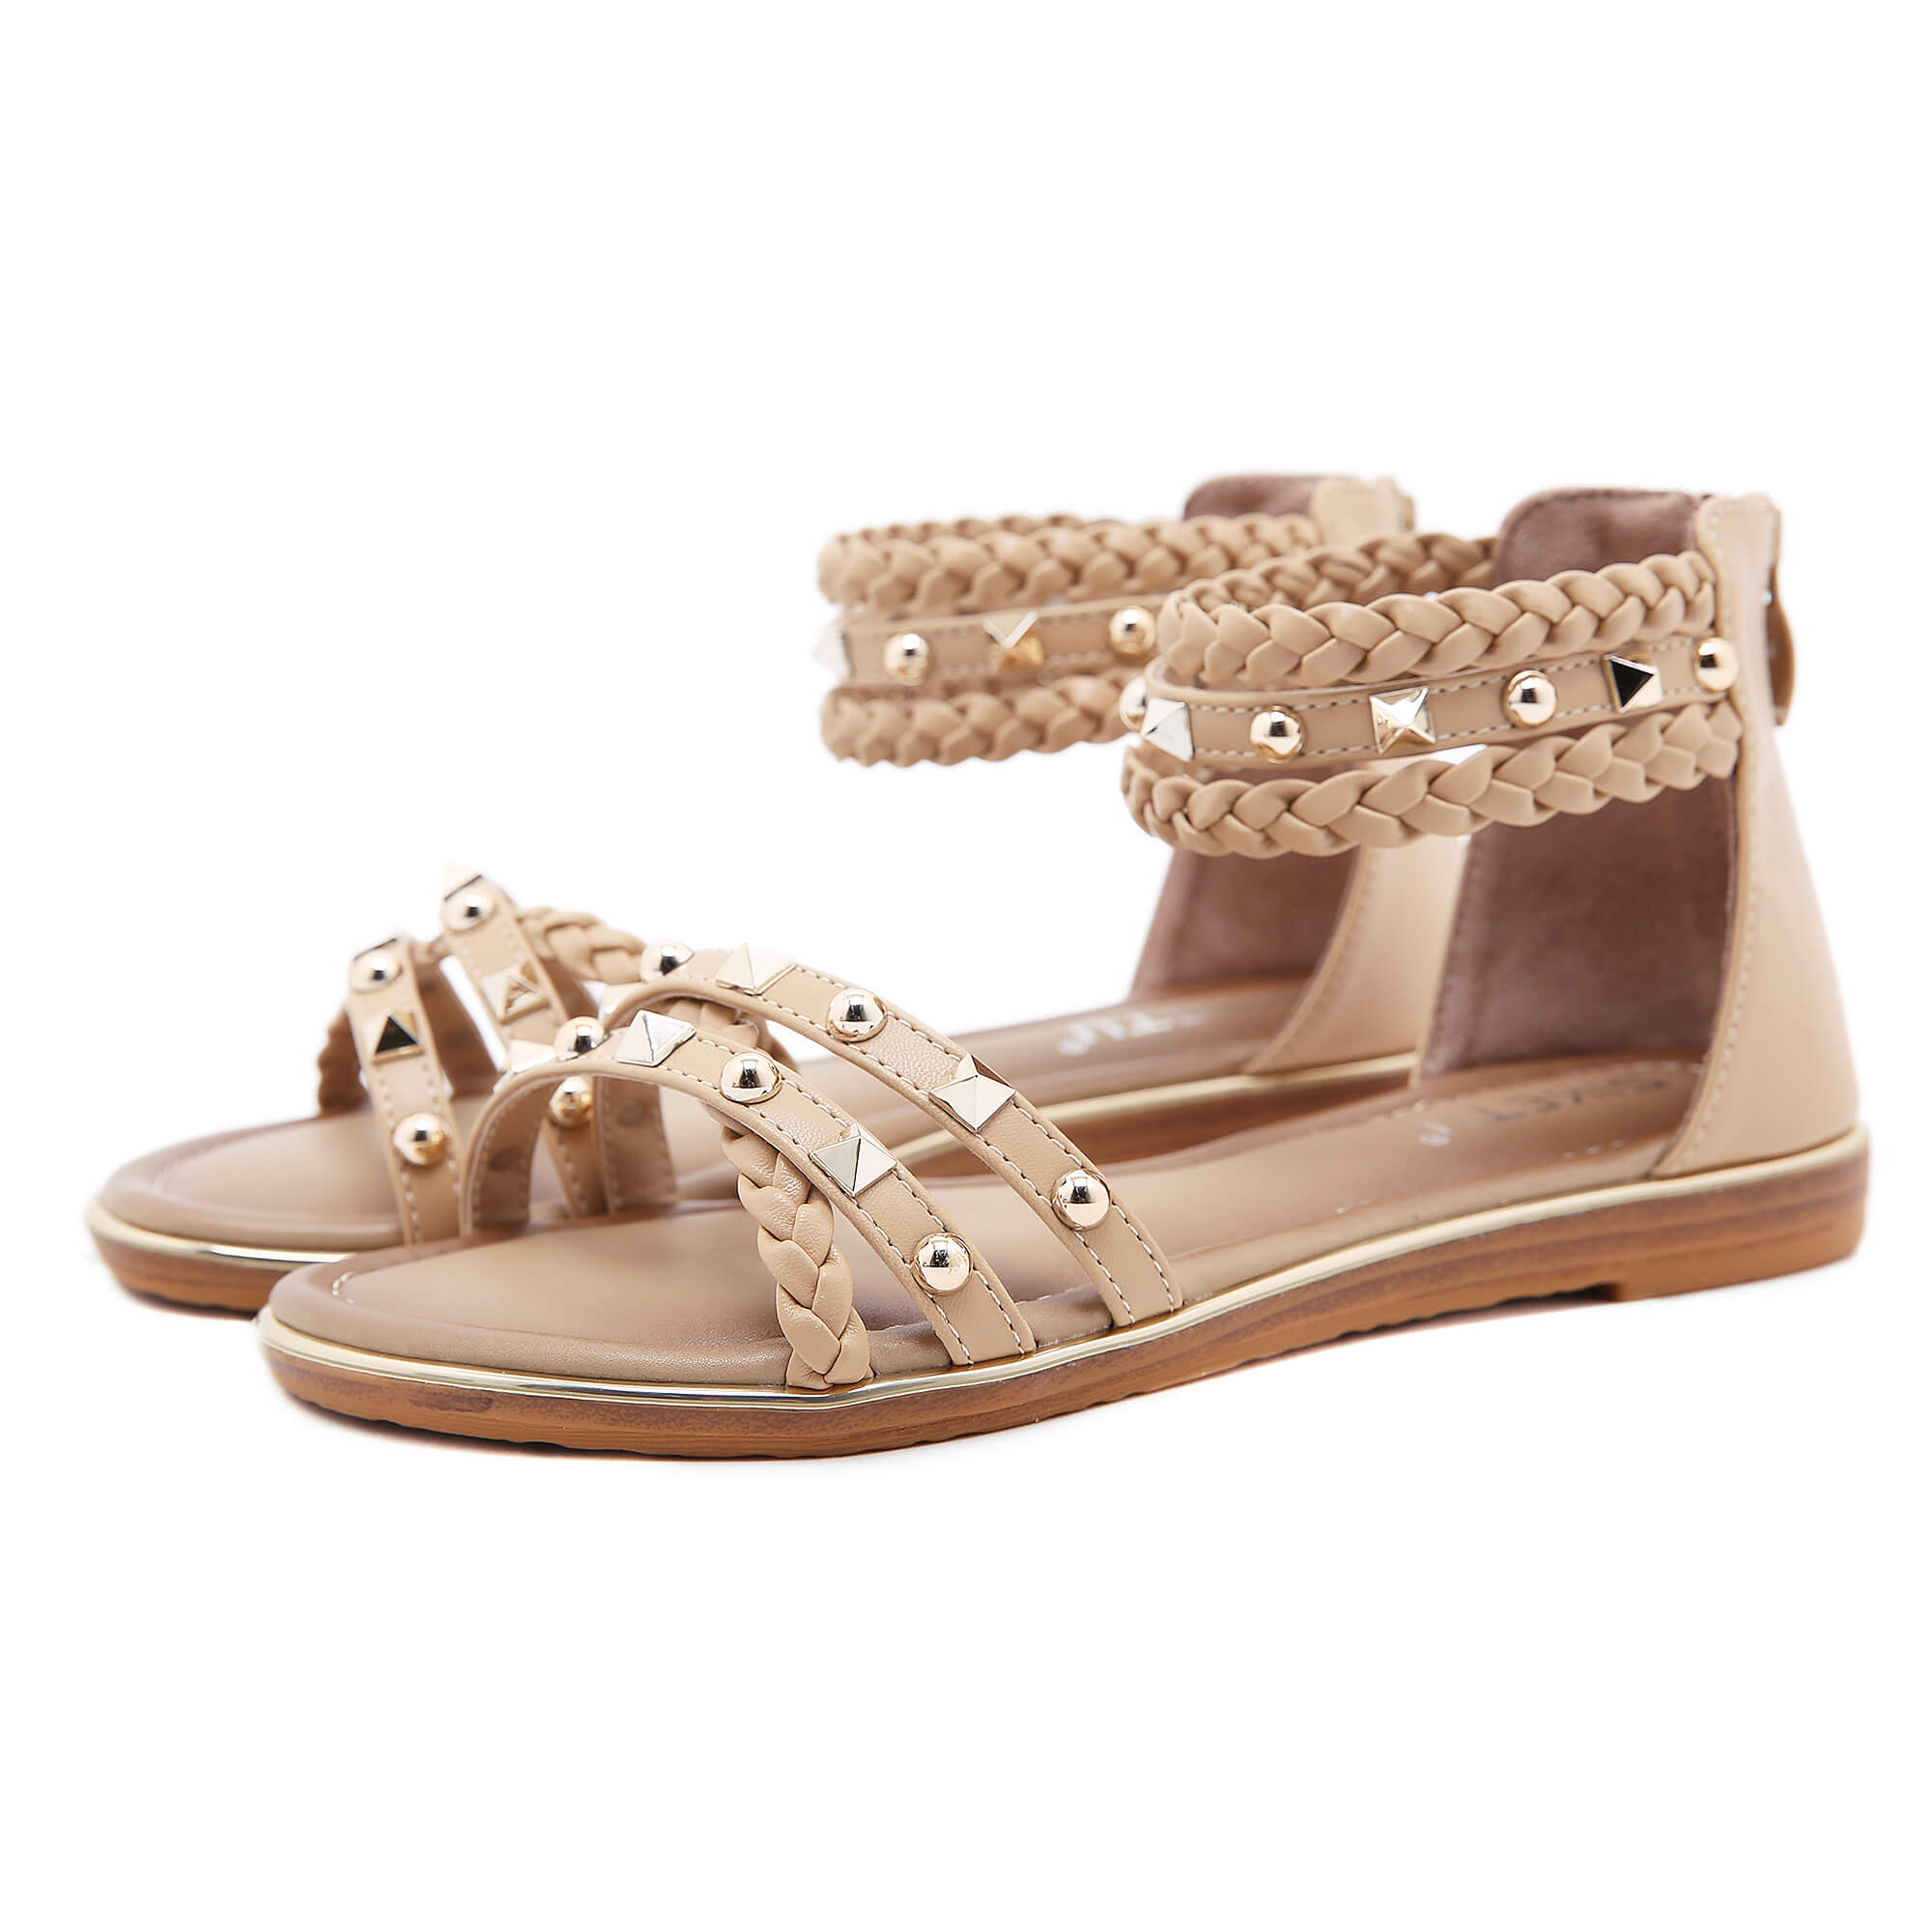 Stud Braided Ankle-Strap Sandals